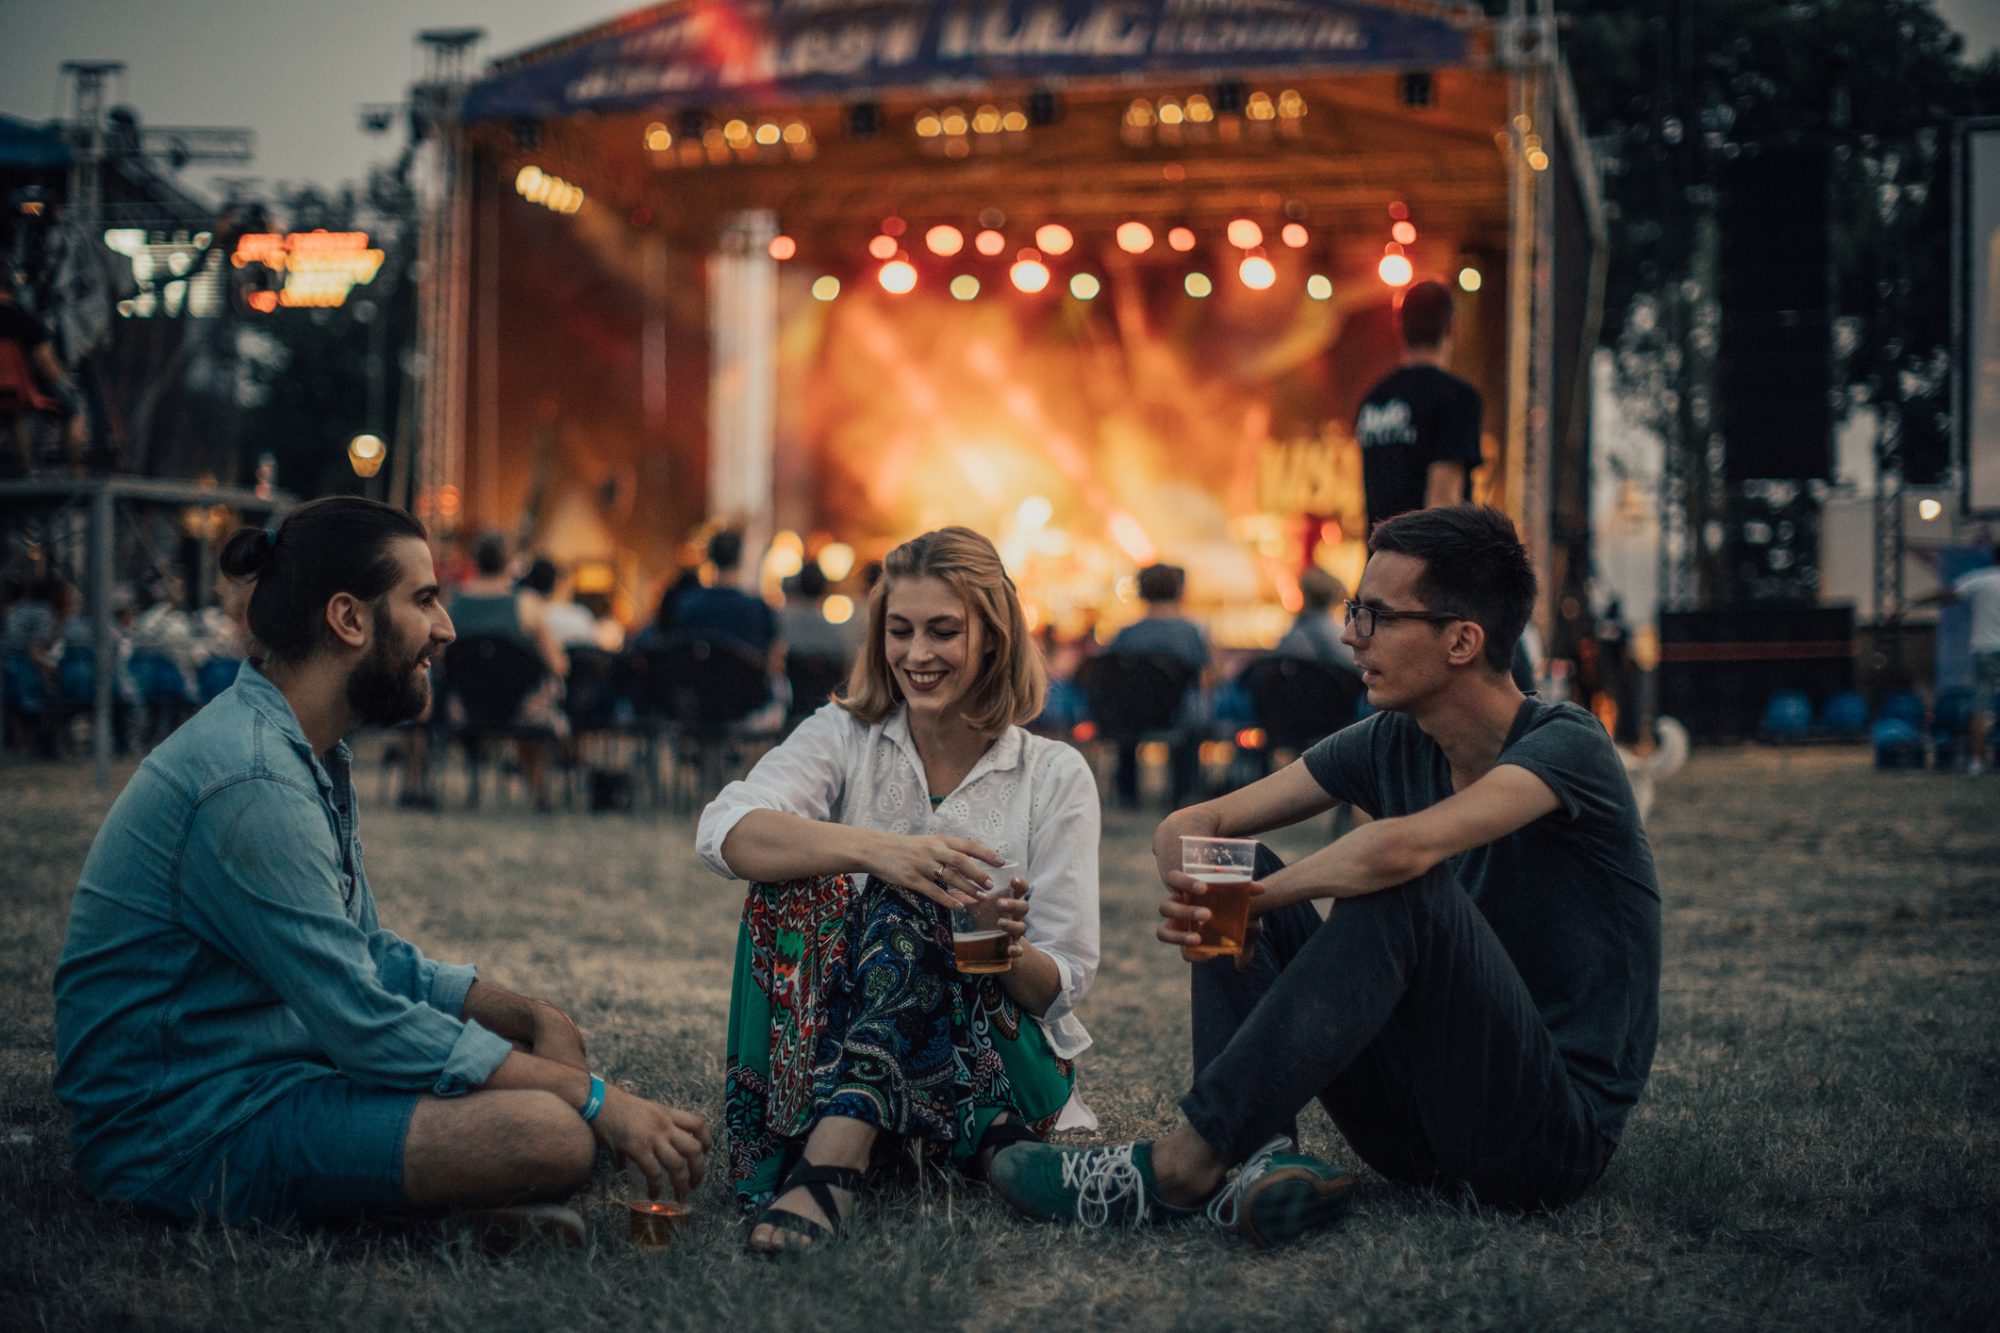 three young adults sitting in front of stage laughing and holding beers with lights in background